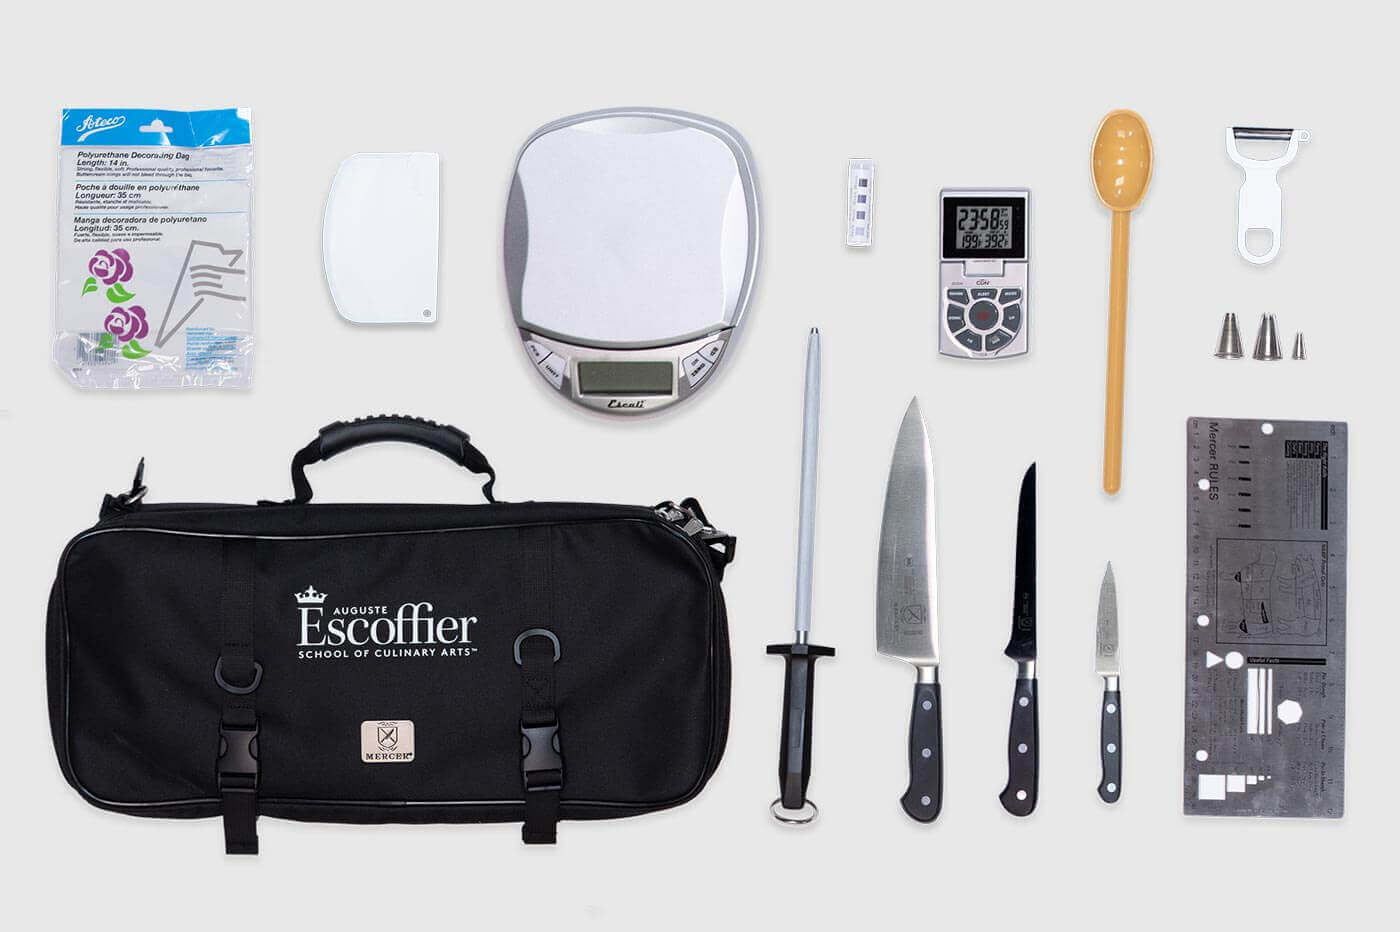 Escoffier Every Student - The Tools for Needs School Professional Culinary Chef Essential